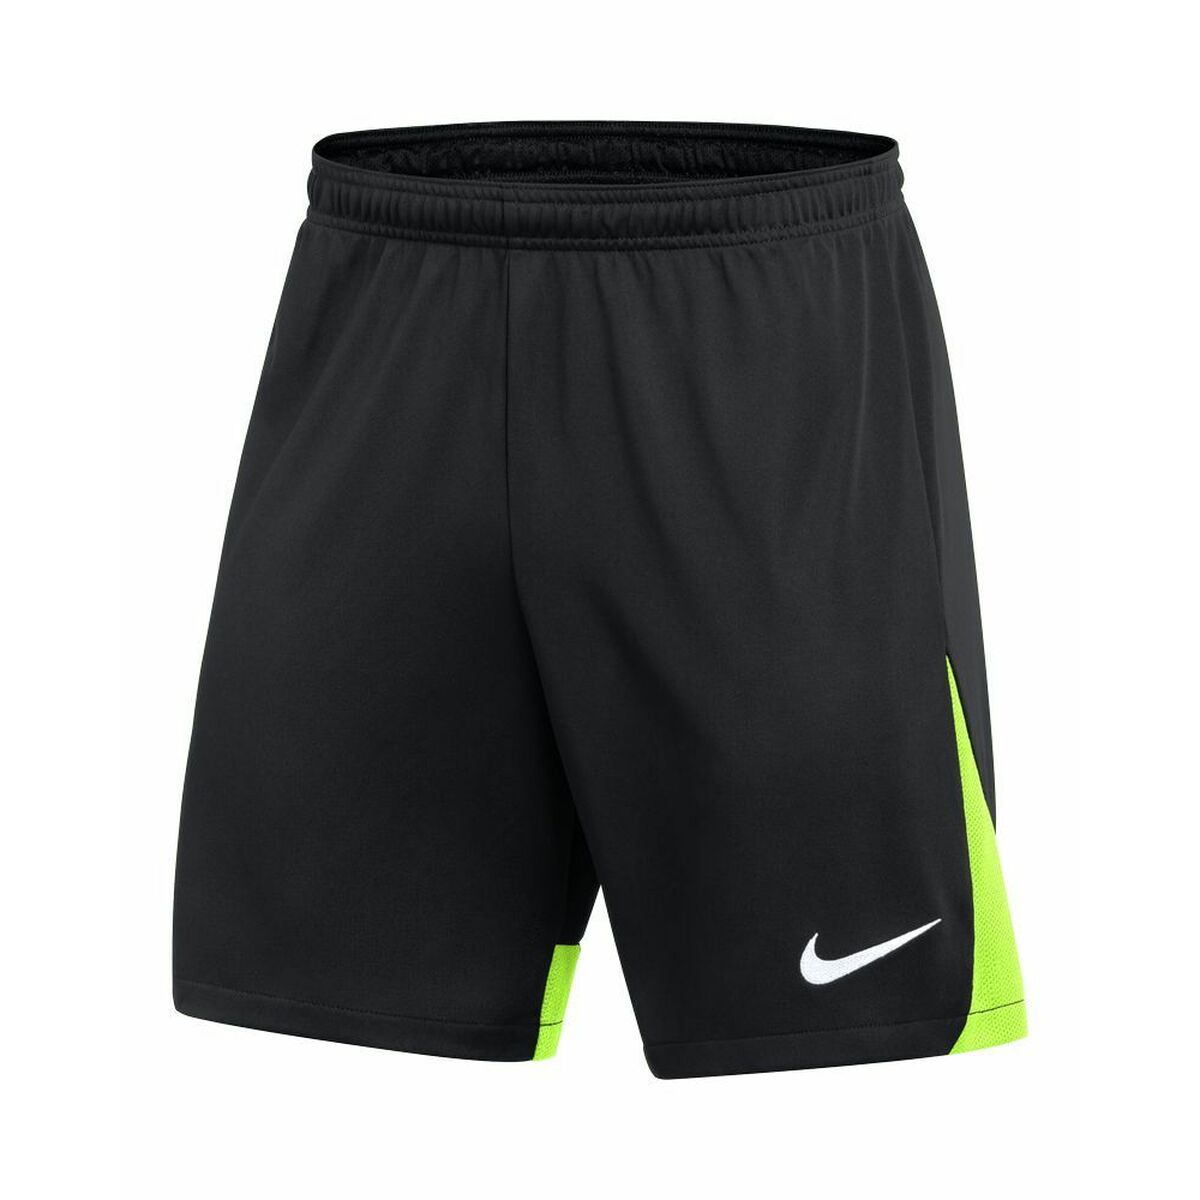 Sport Shorts for Kids Nike ACDPR SS TOP DH9287 010 Black 16 Years